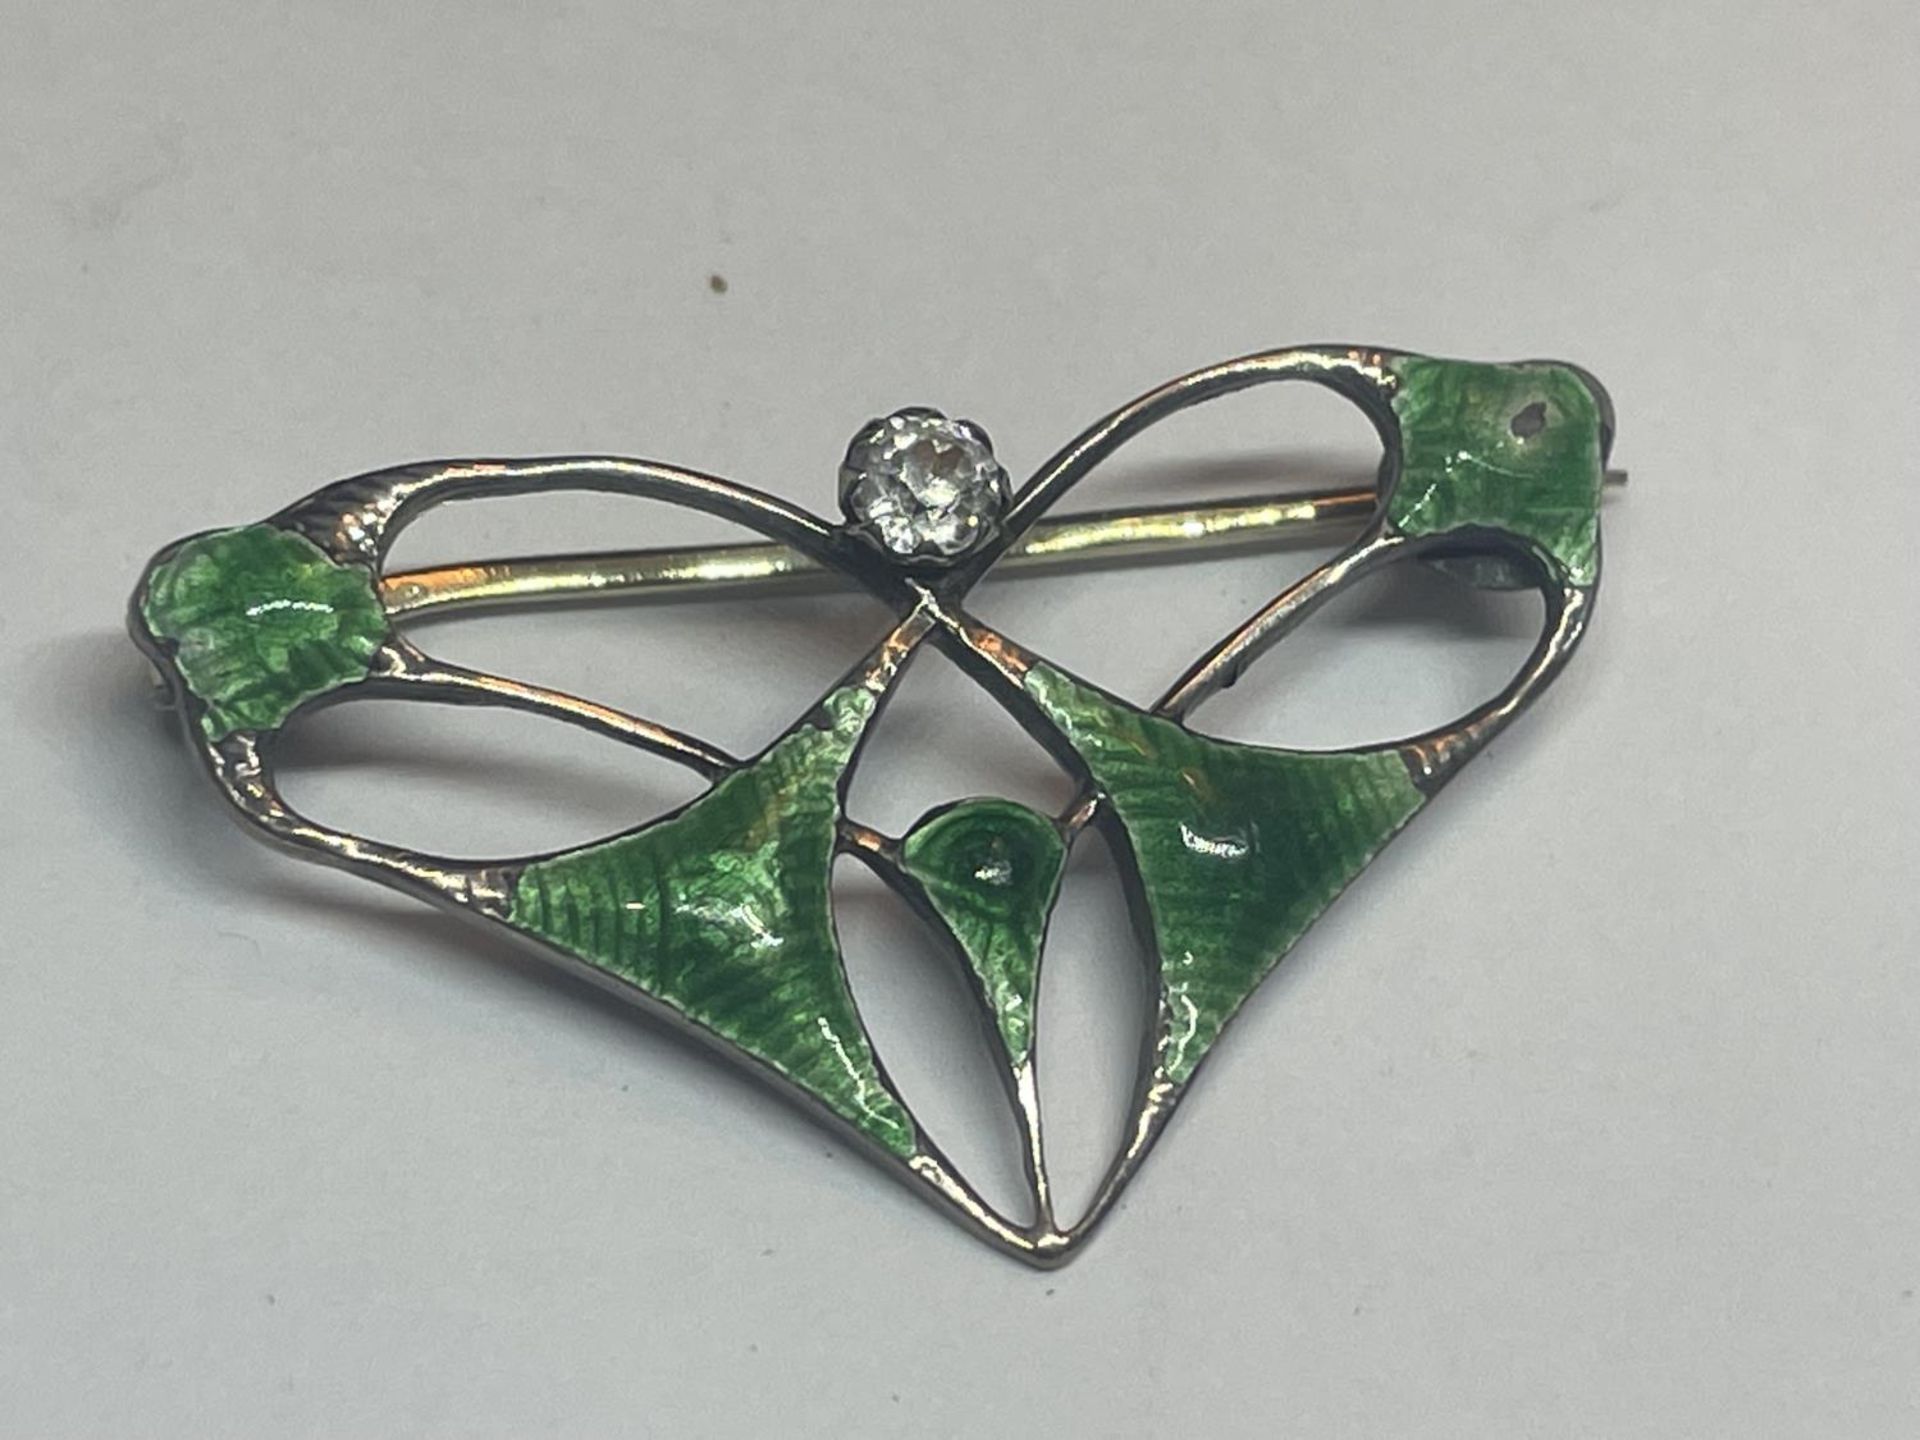 A CHARLES HORNER CHESTER SILVER AND ENAMELLED BROOCH IN A PRESENTATION BOX